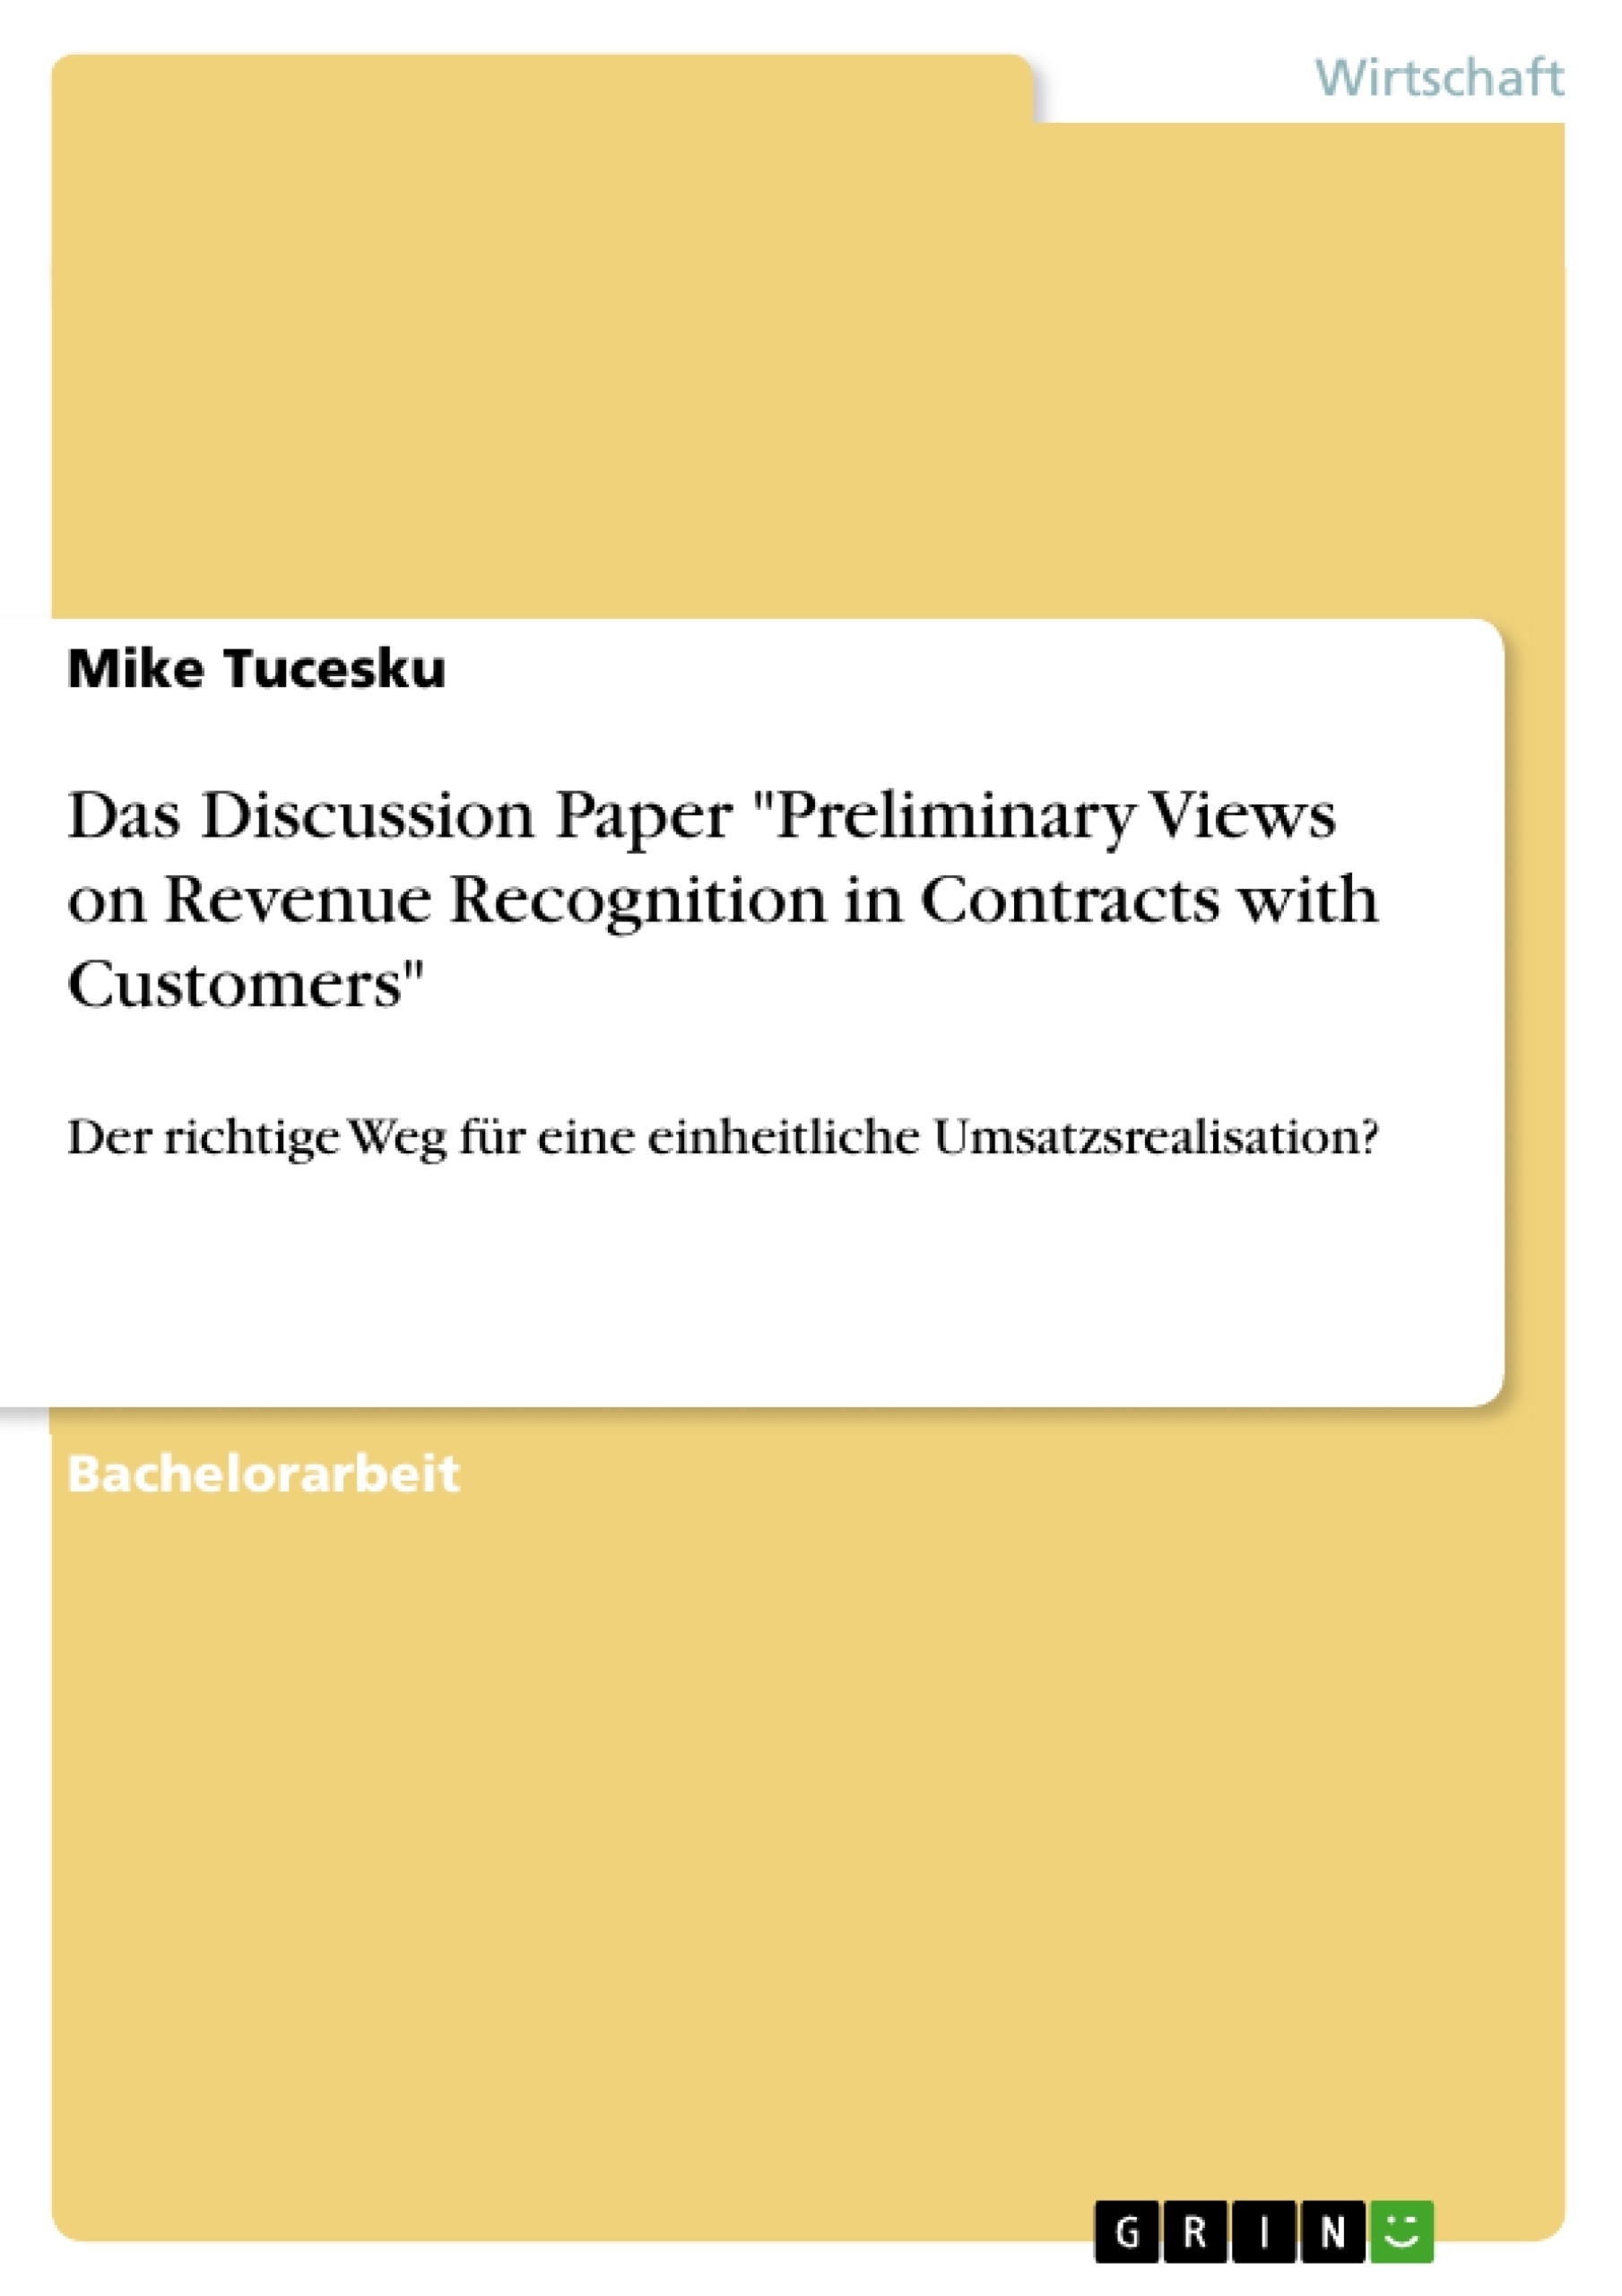 Título: Das Discussion Paper  "Preliminary Views on Revenue Recognition in Contracts with Customers"